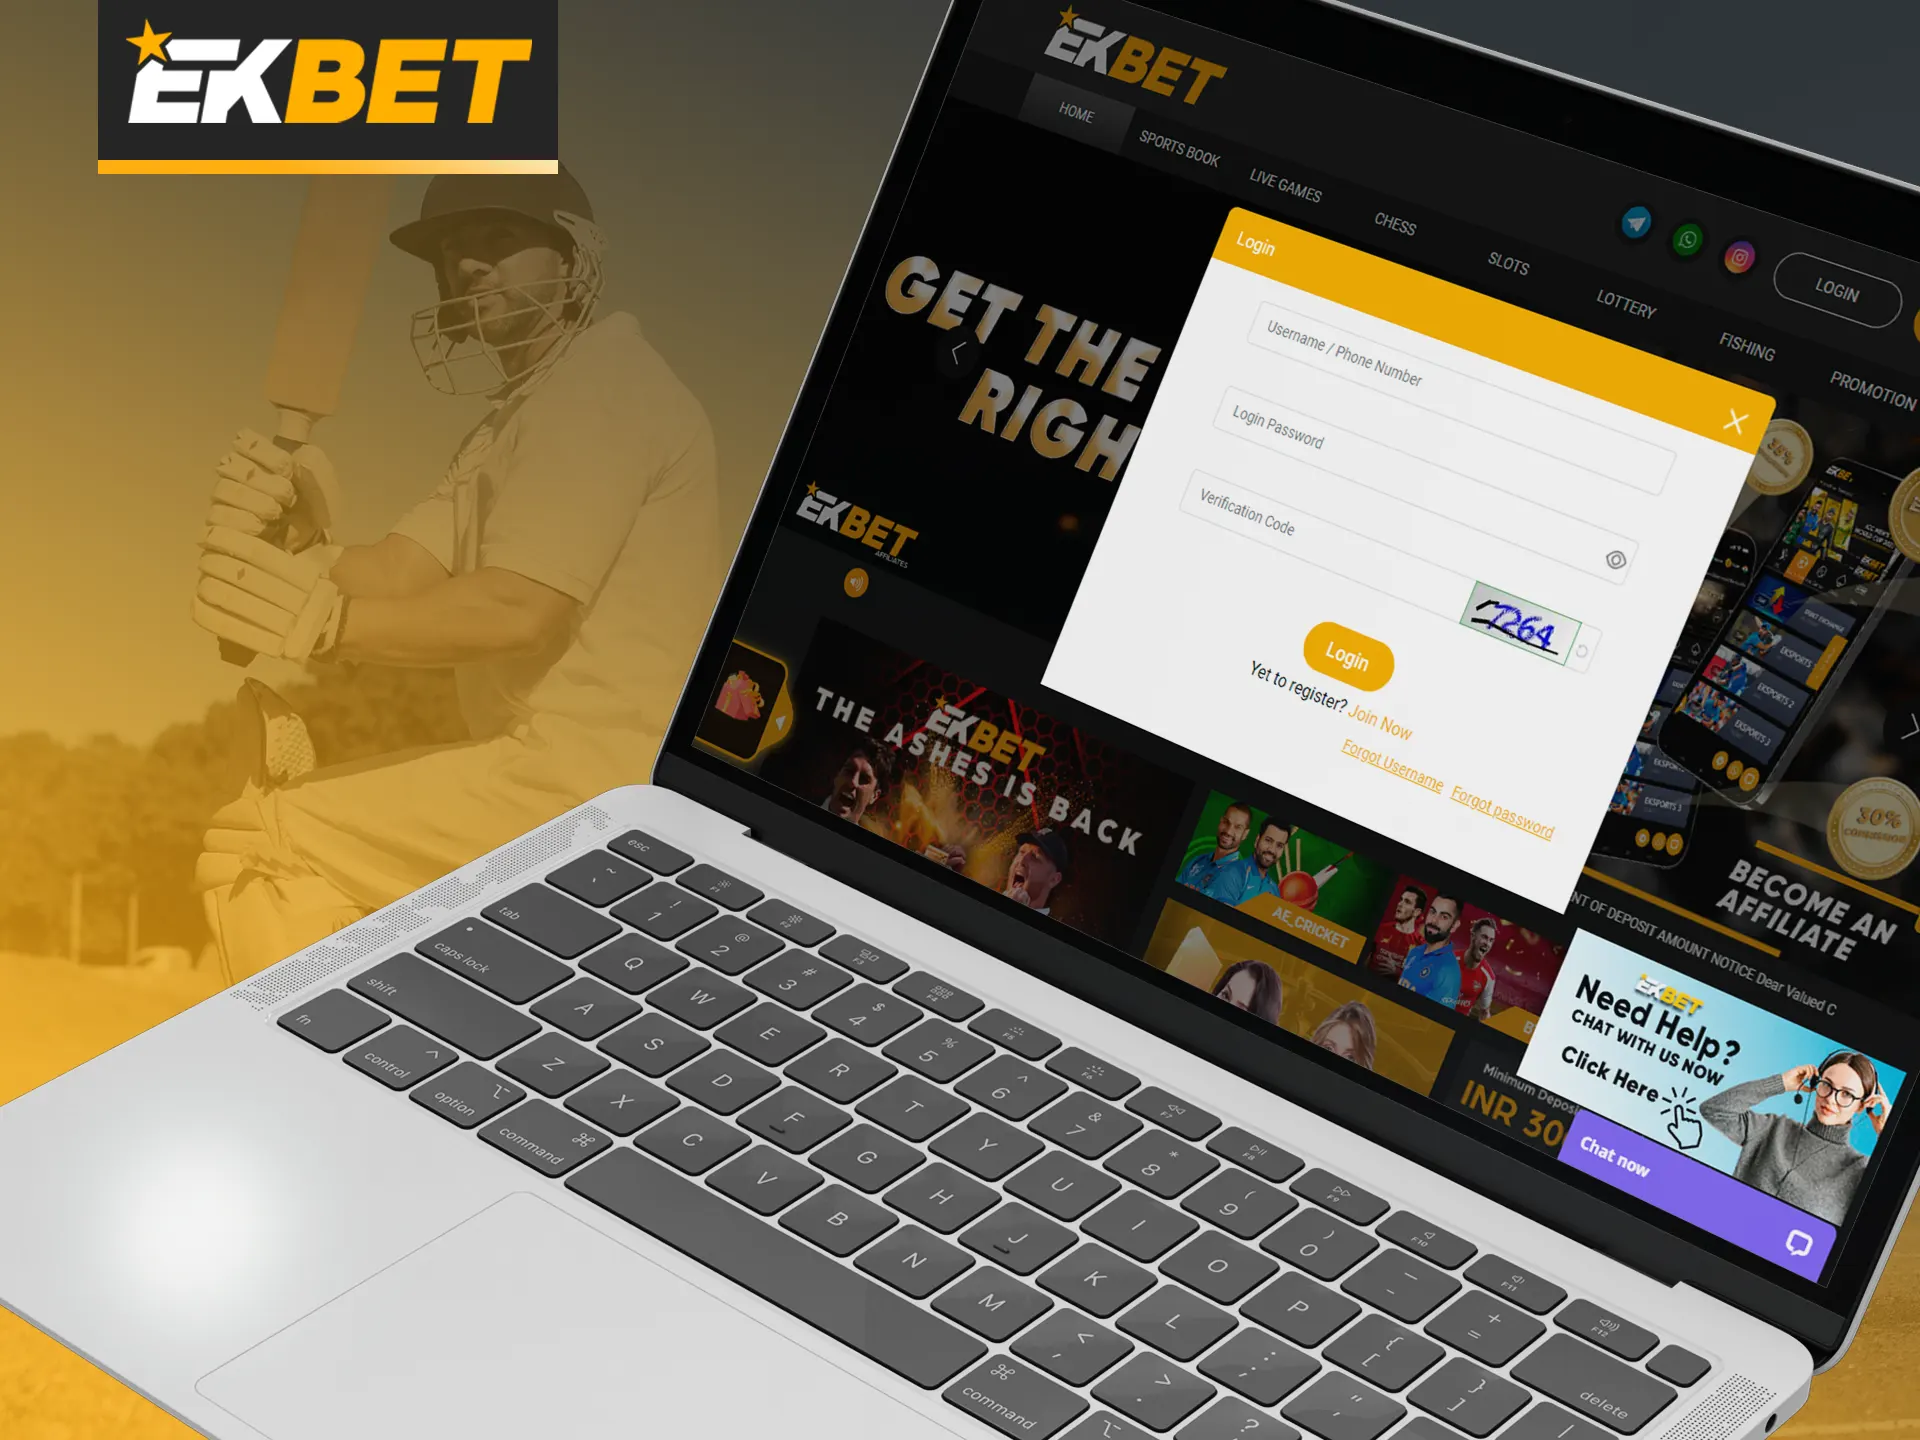 You can log in to your EKbet account either from your personal computer or mobile device.